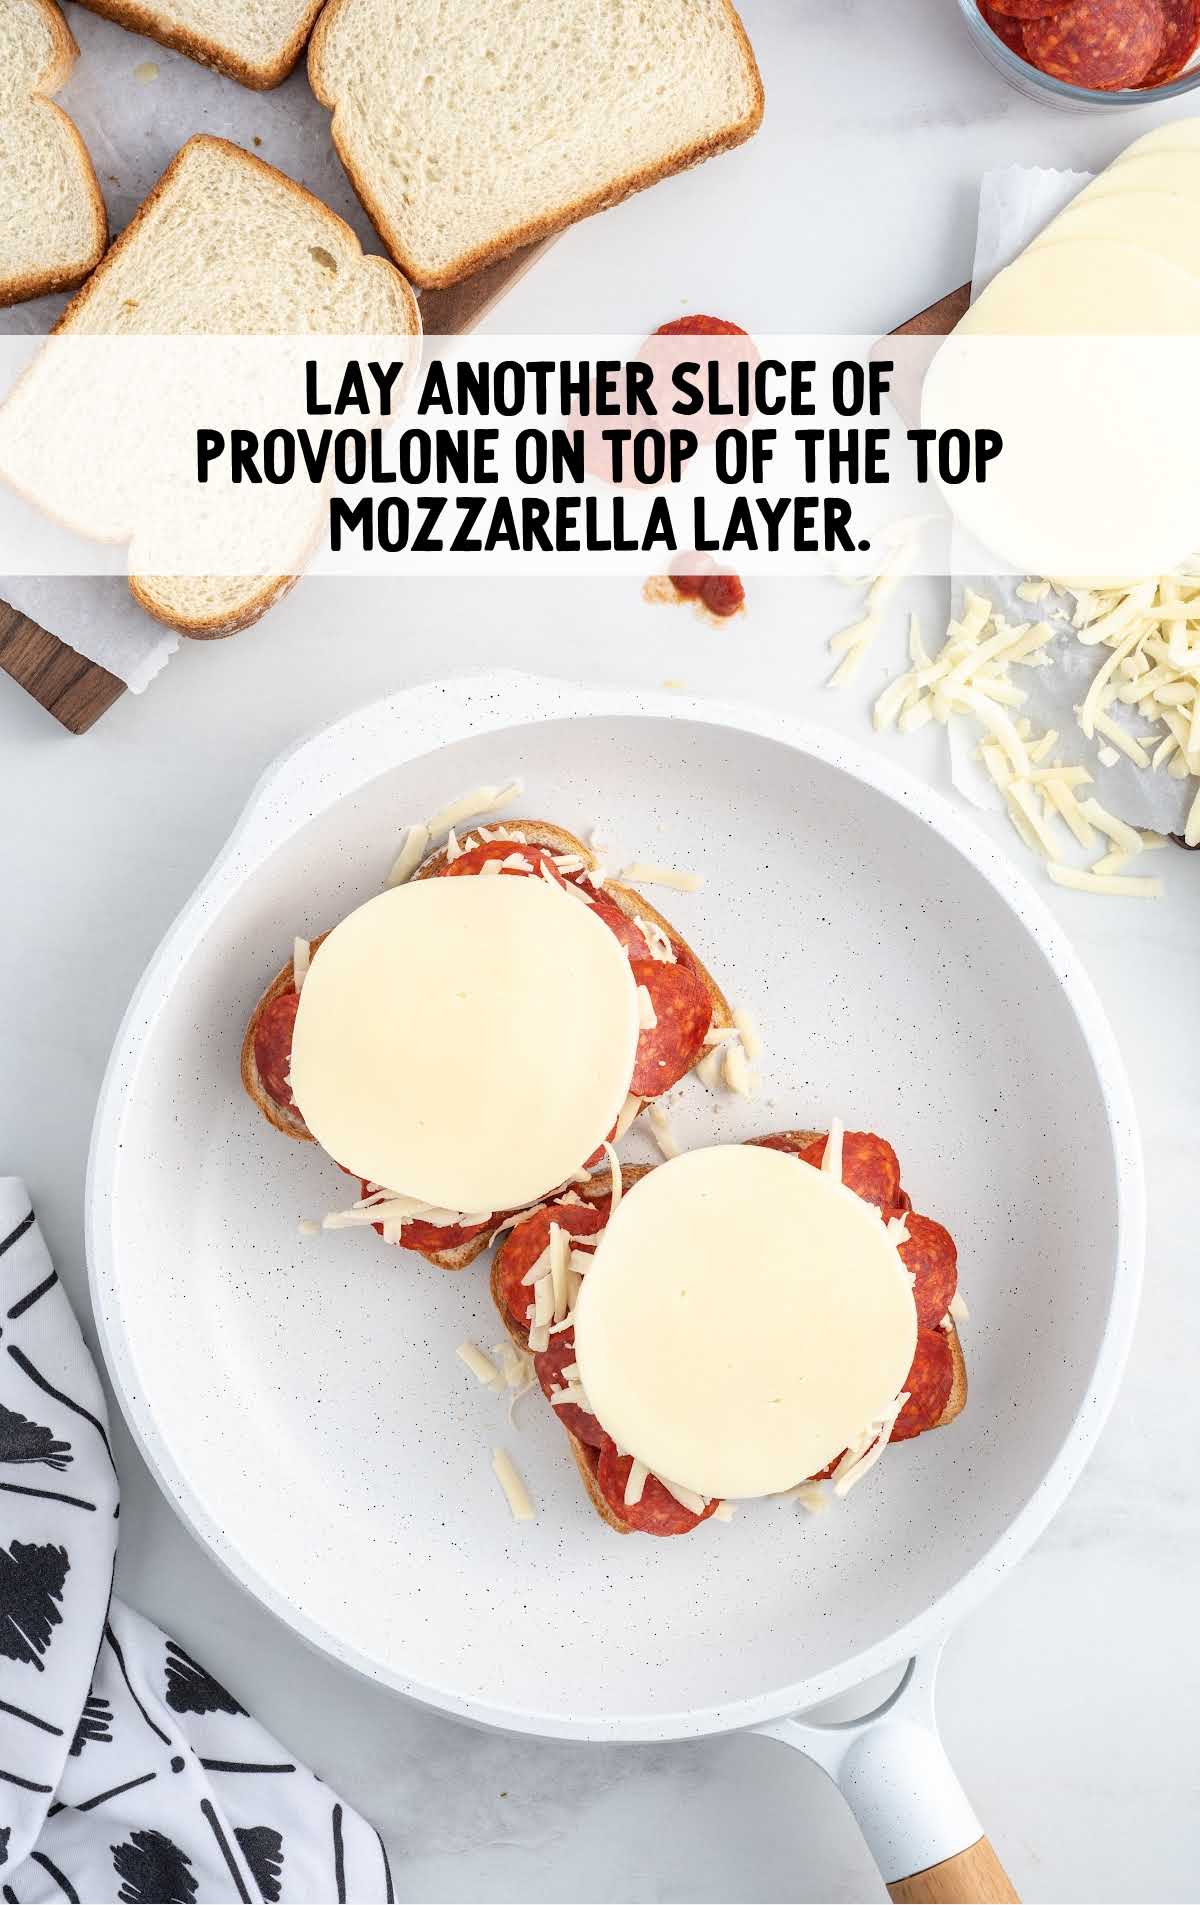 slices of provolone placed on top of the shredded mozzarella 